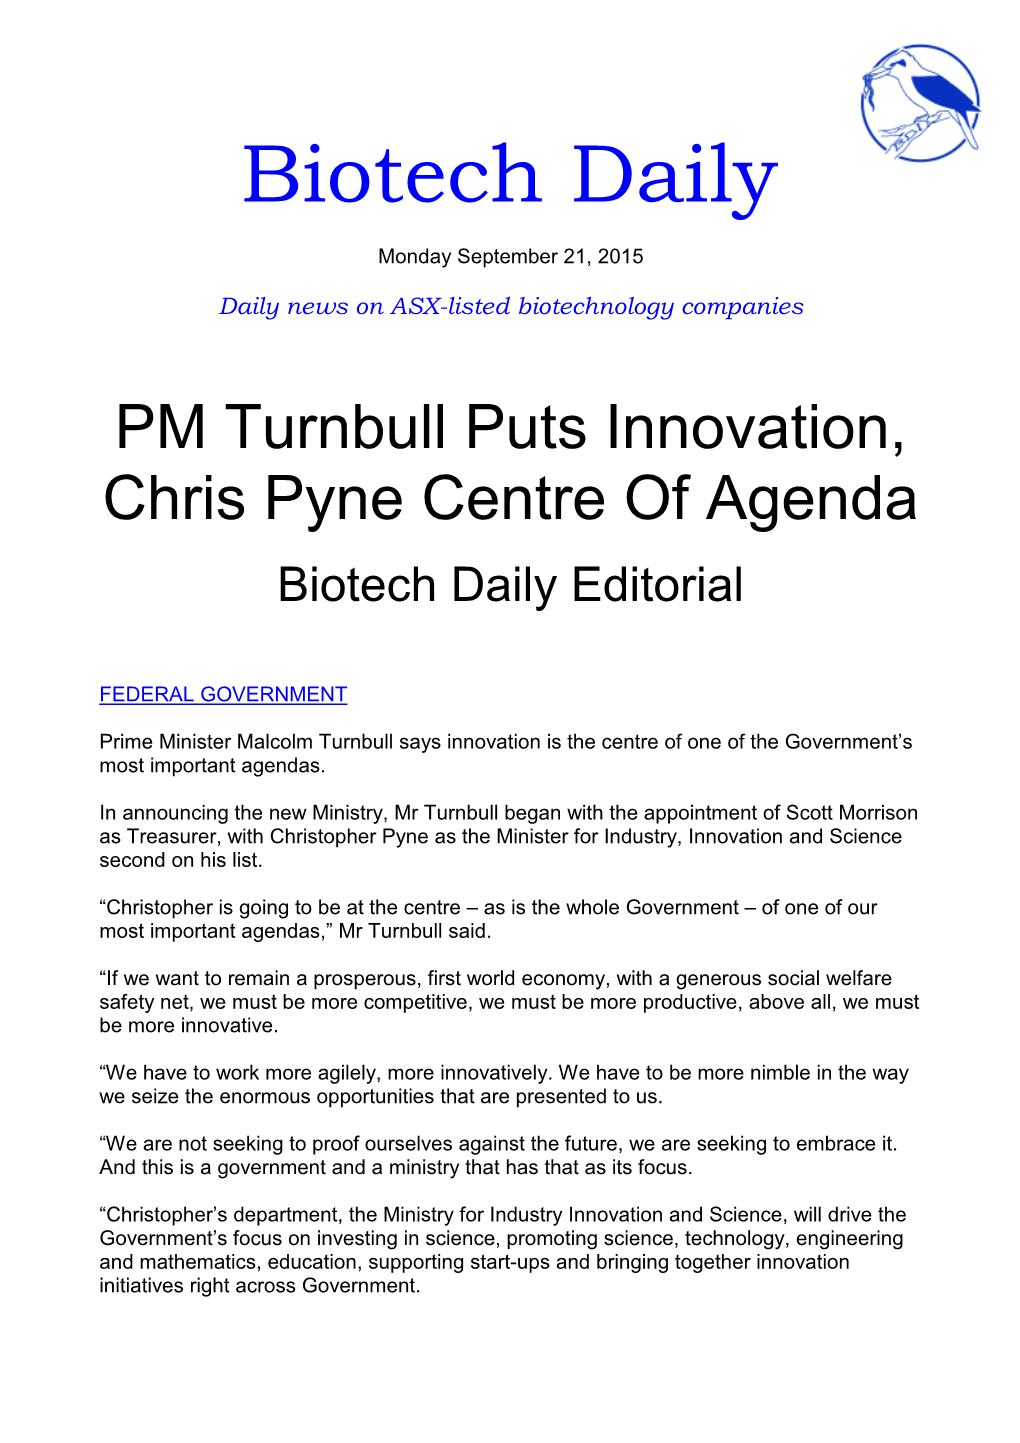 PM Turnbull Puts Innovation, Chris Pyne Centre of Agenda Biotech Daily Editorial